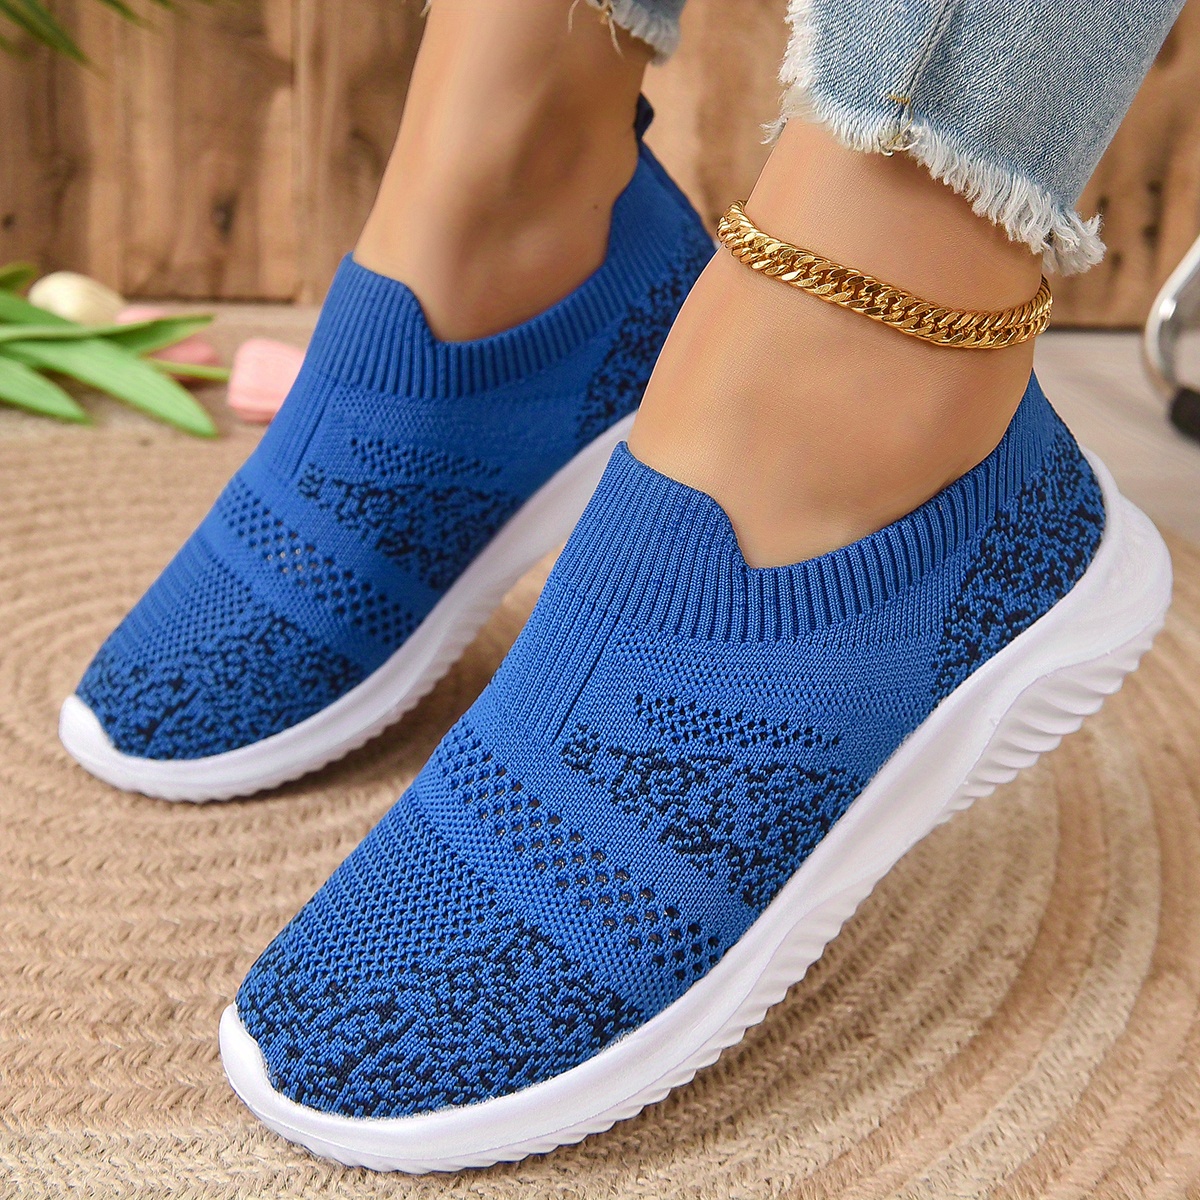 EEUK 2022 Spring Sneakers Women Casual Breathable Sport Shoes Fashion, Flat  Fly Woven Breathable Hook and Loop Fastener Mesh Shoes Casual Breathable